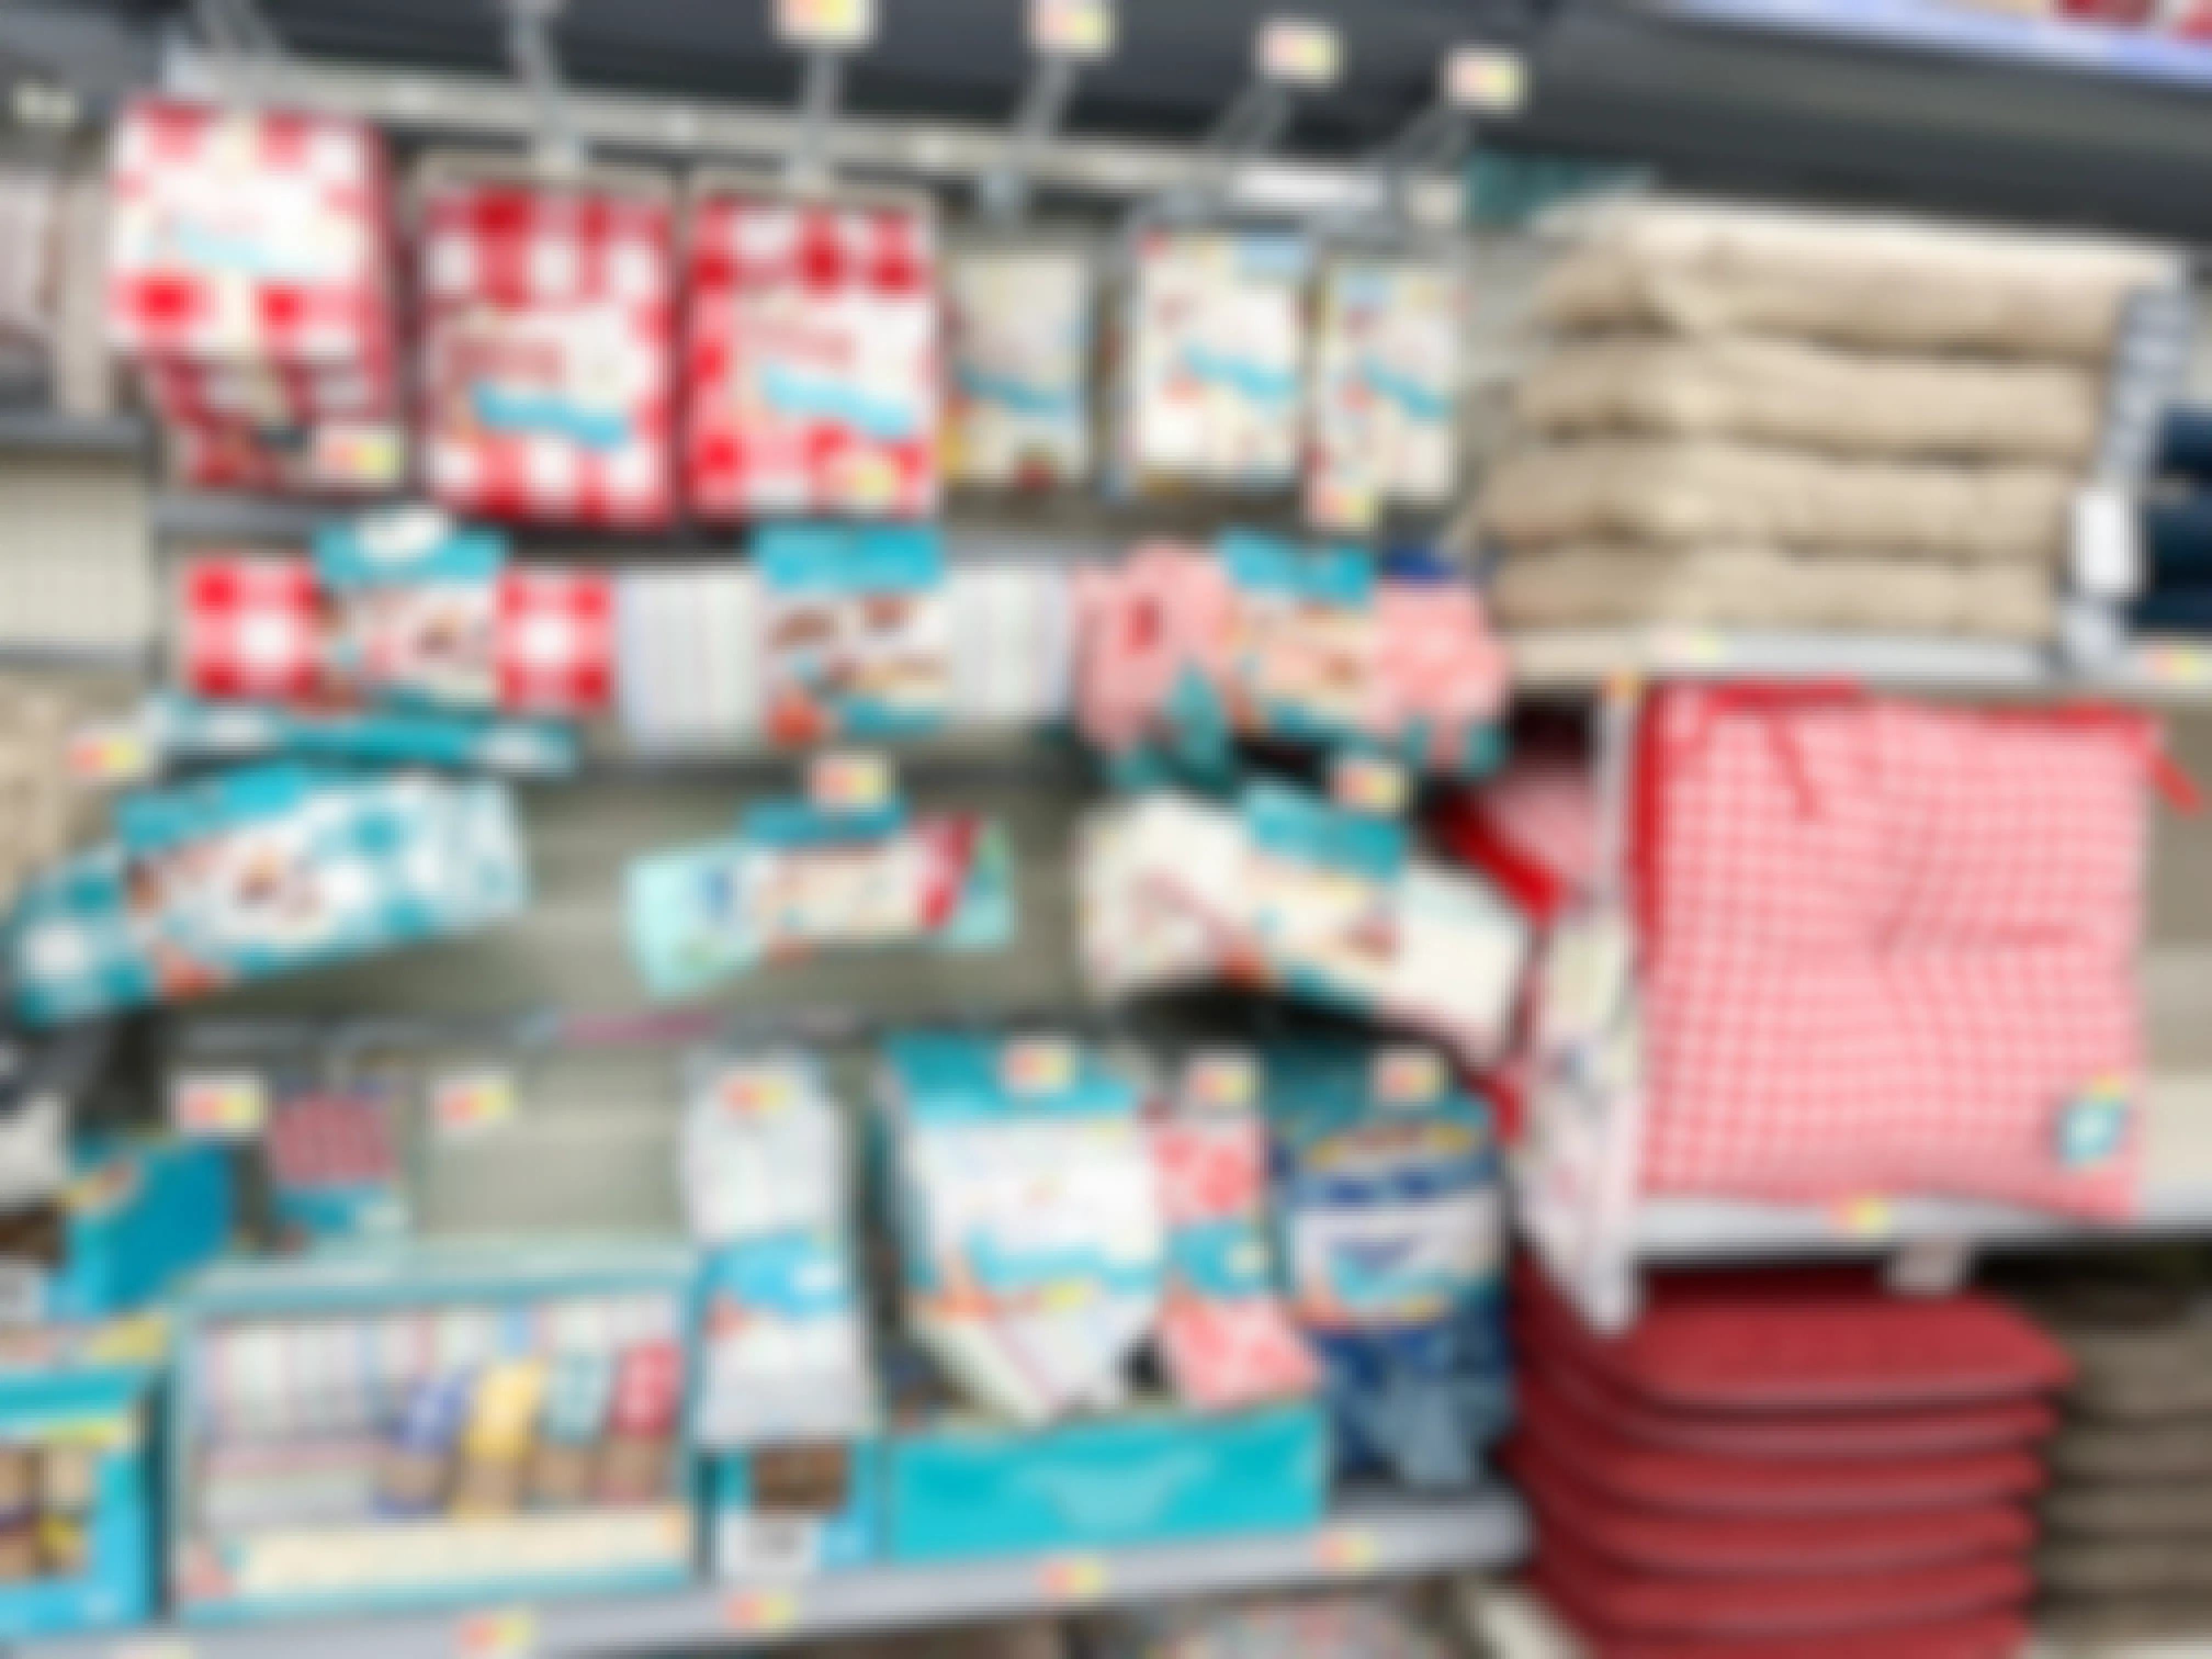 A walmart shelf filled with The Pioneer Woman kitchen and home items, including dish towels, chair cushions, and more